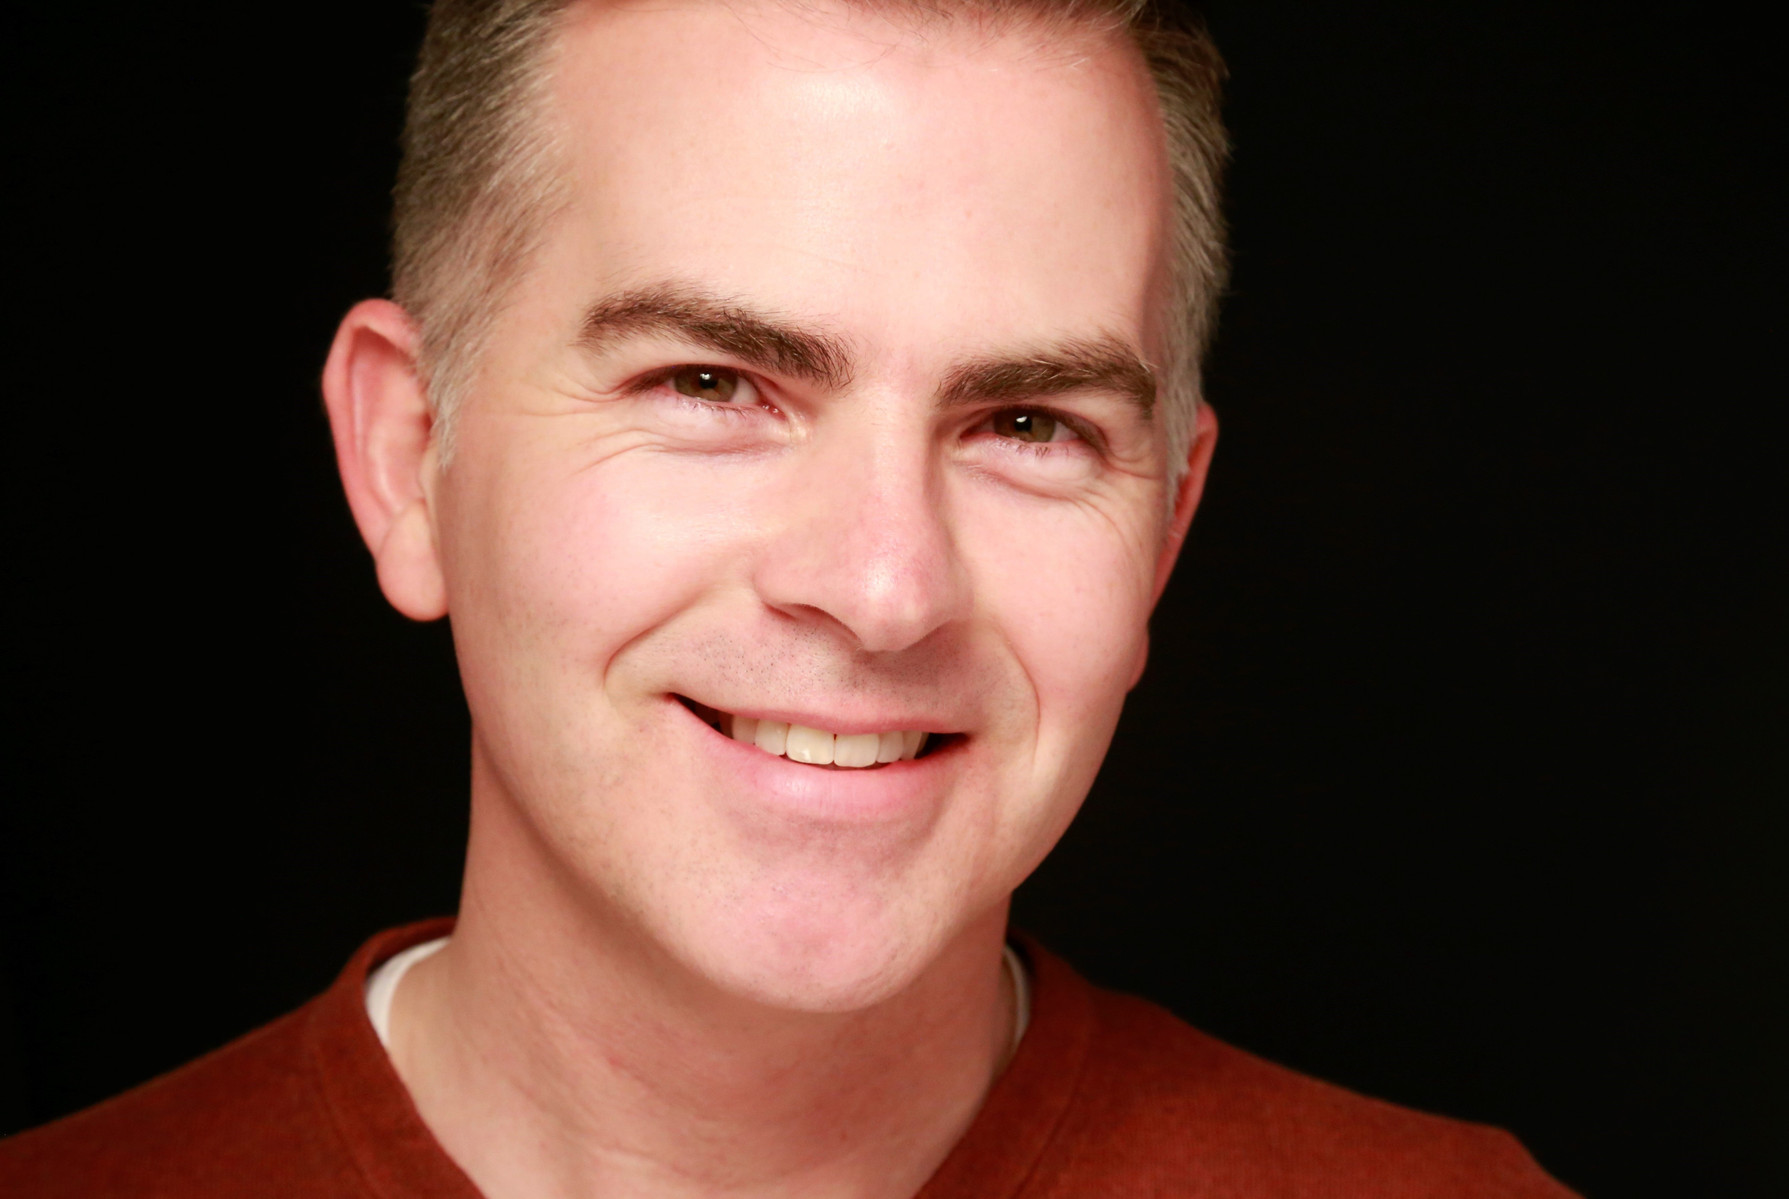 Professional Headshot of a man wearing a red top against a black background